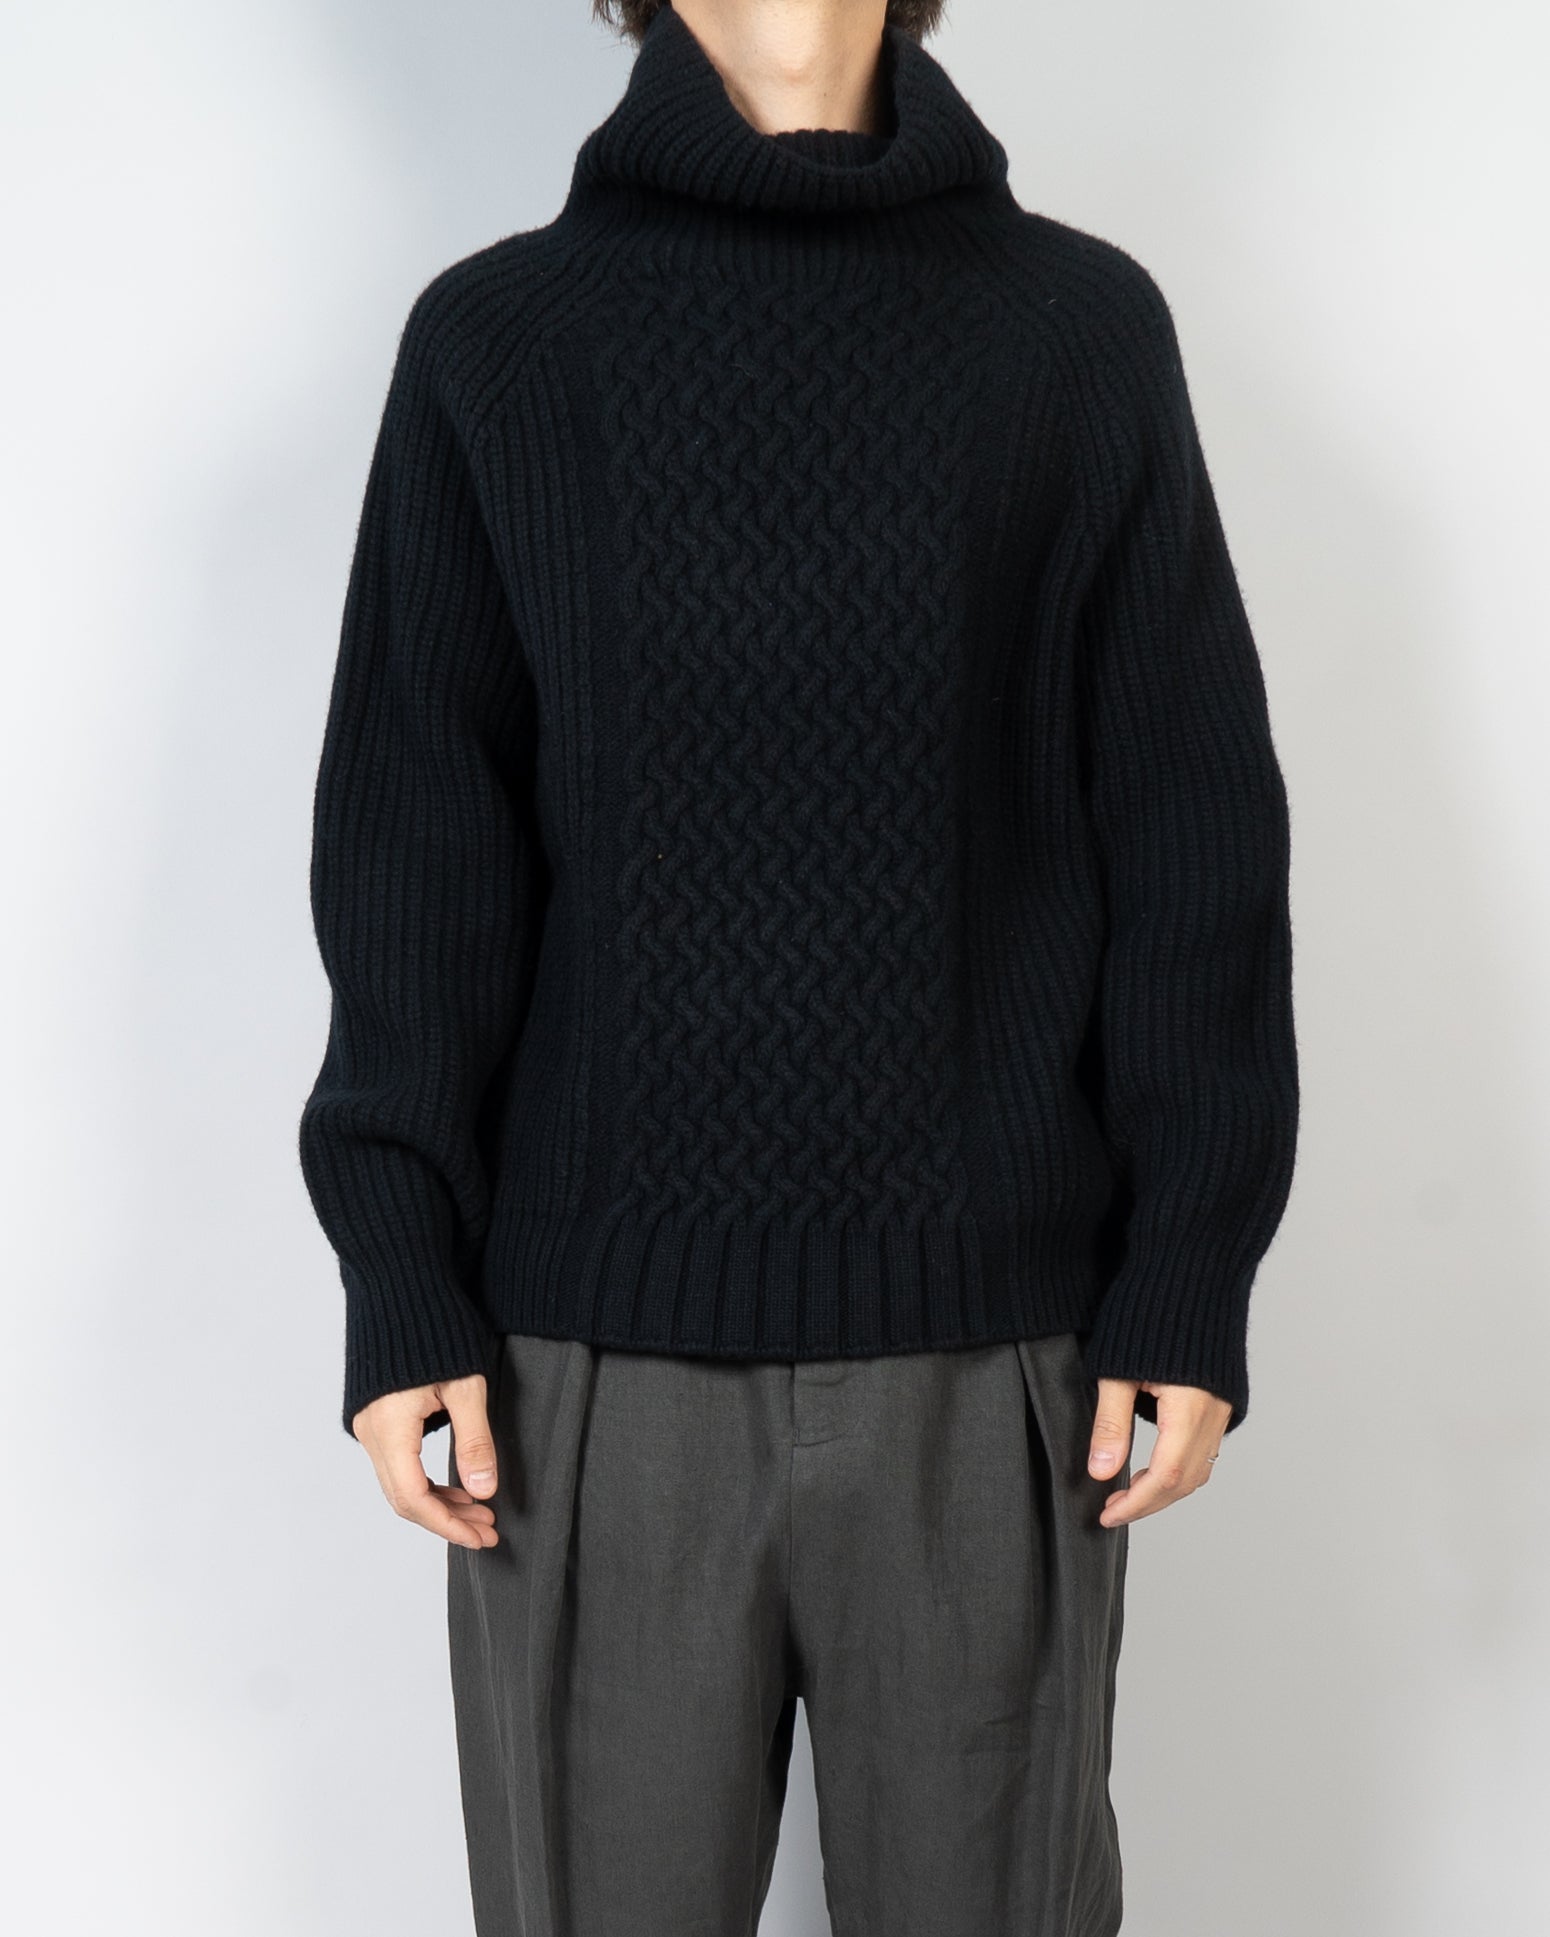 FW20 Chunky Cableknit Turtleneck Sample